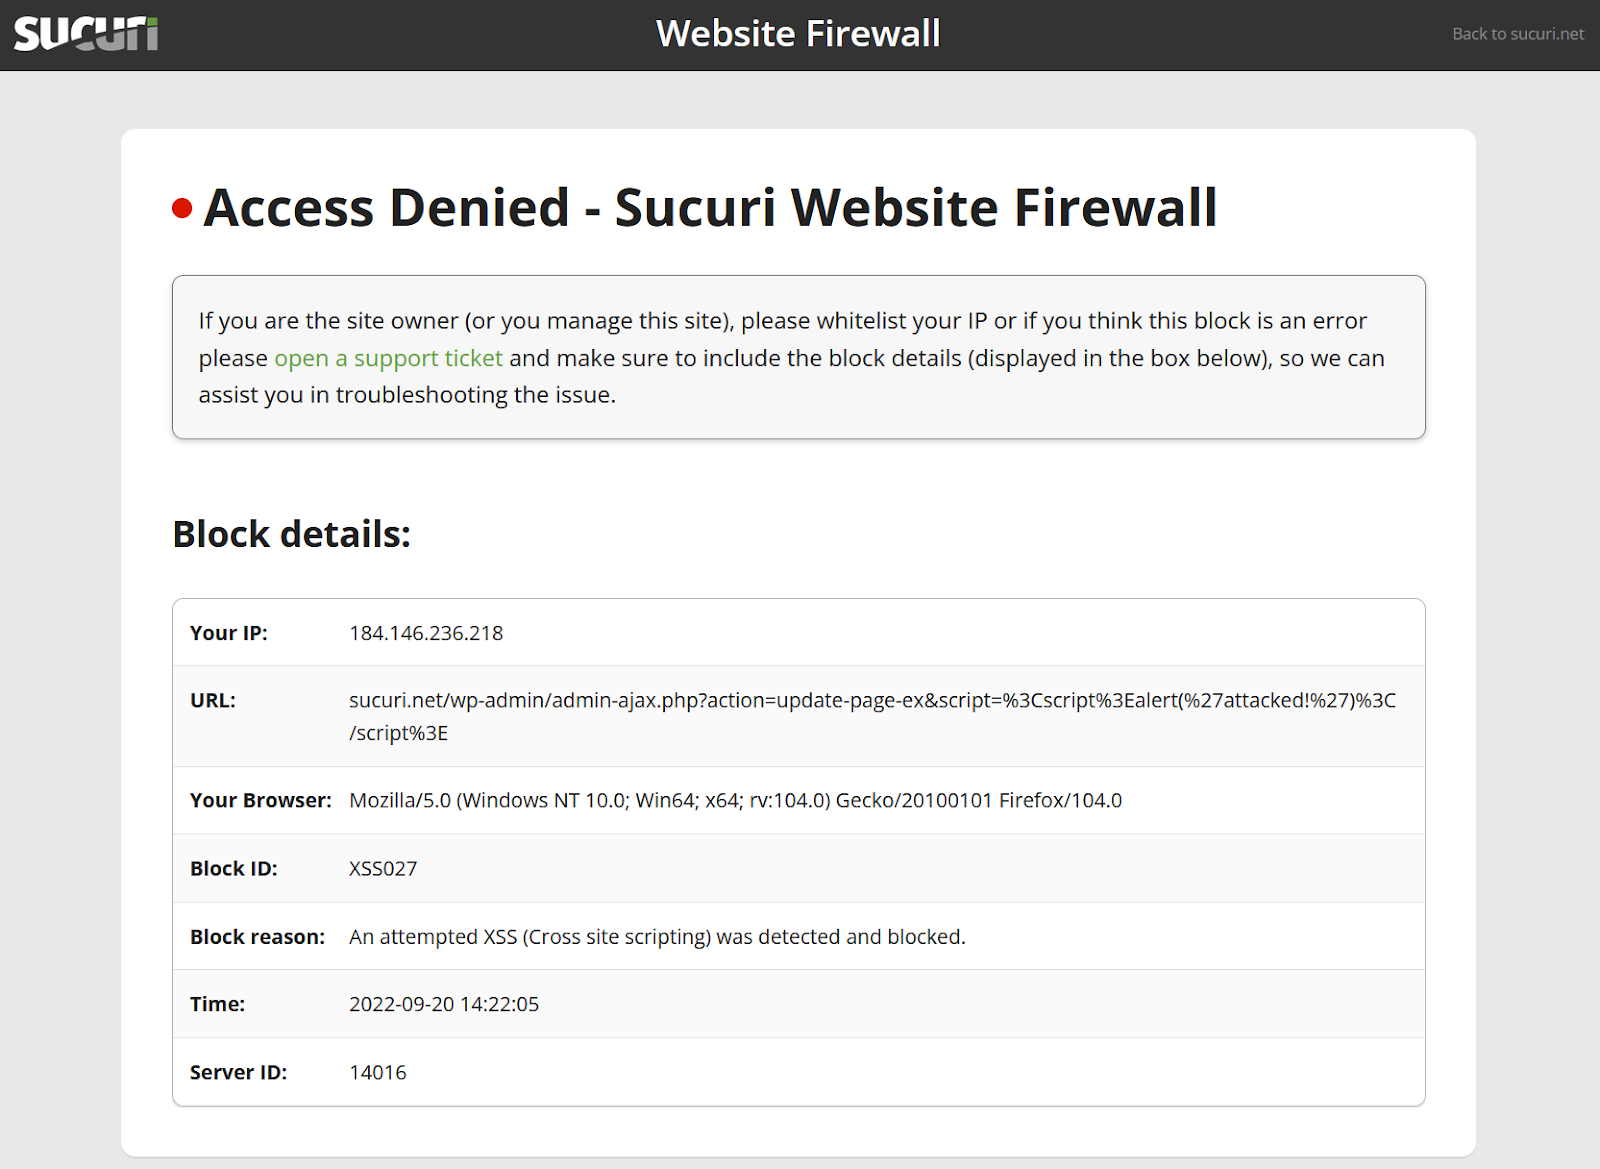 Example of the Sucuri Firewall virtually patching a known vulnerability